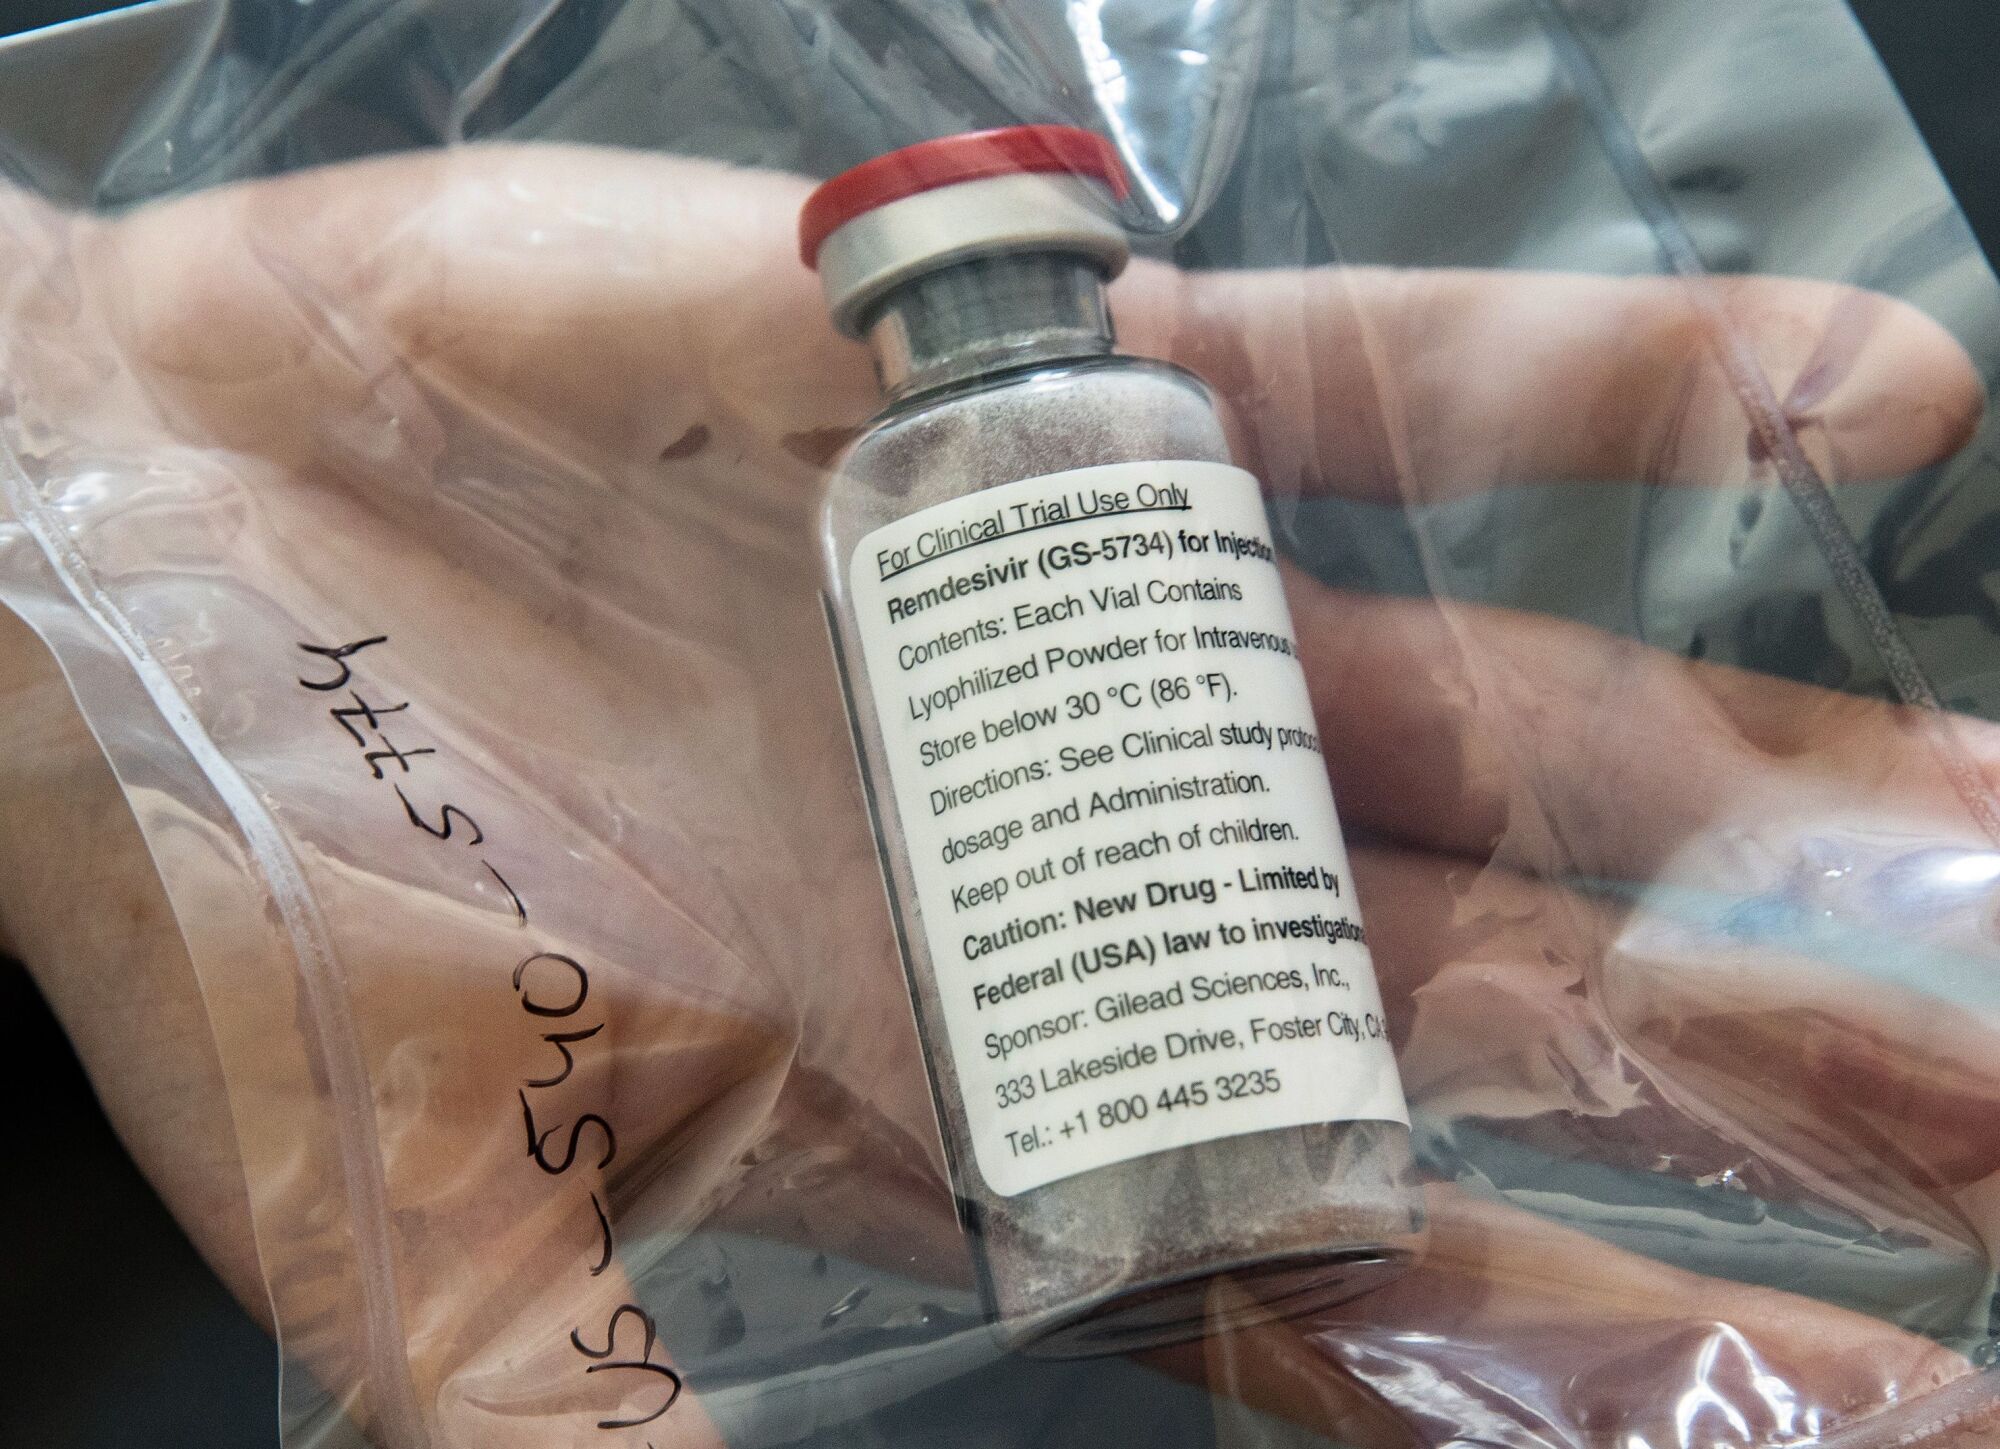 A vial of the drug remdesivir shown at a news conference.